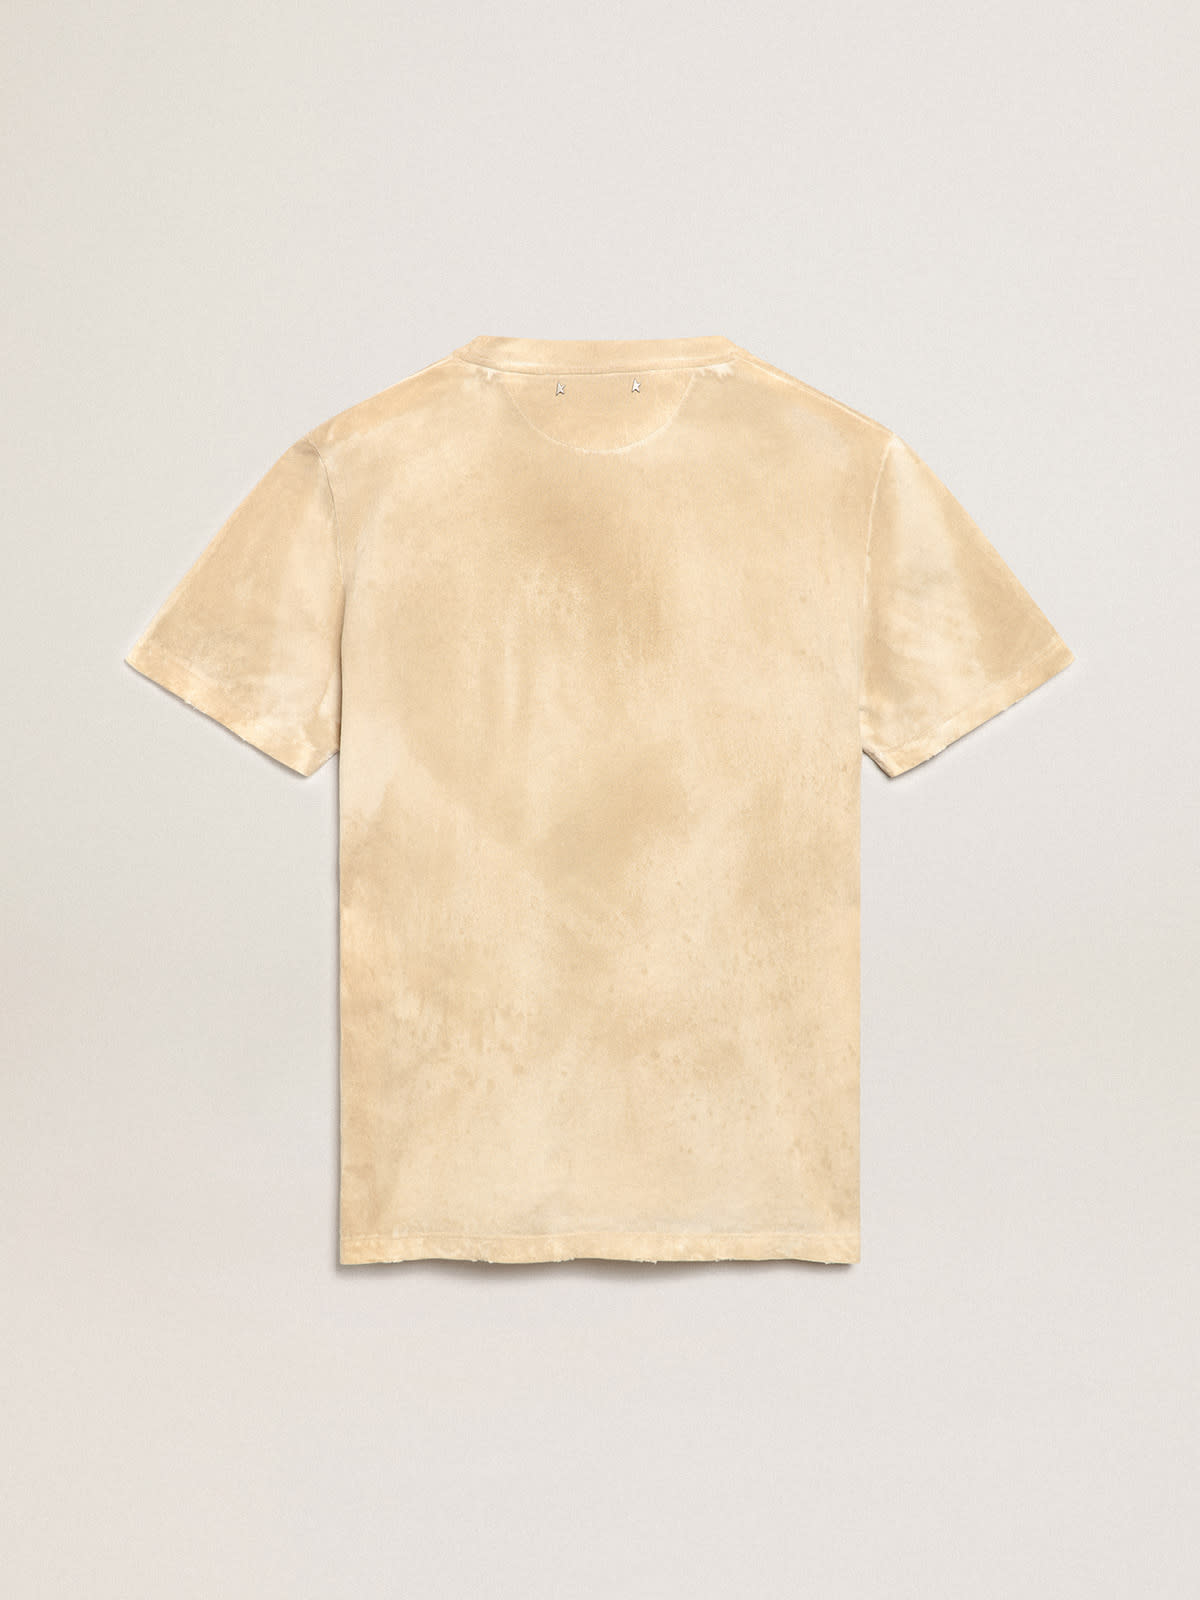 Golden Goose - Paper-effect bone-white Journey Collection T-shirt with floral print on the front in 